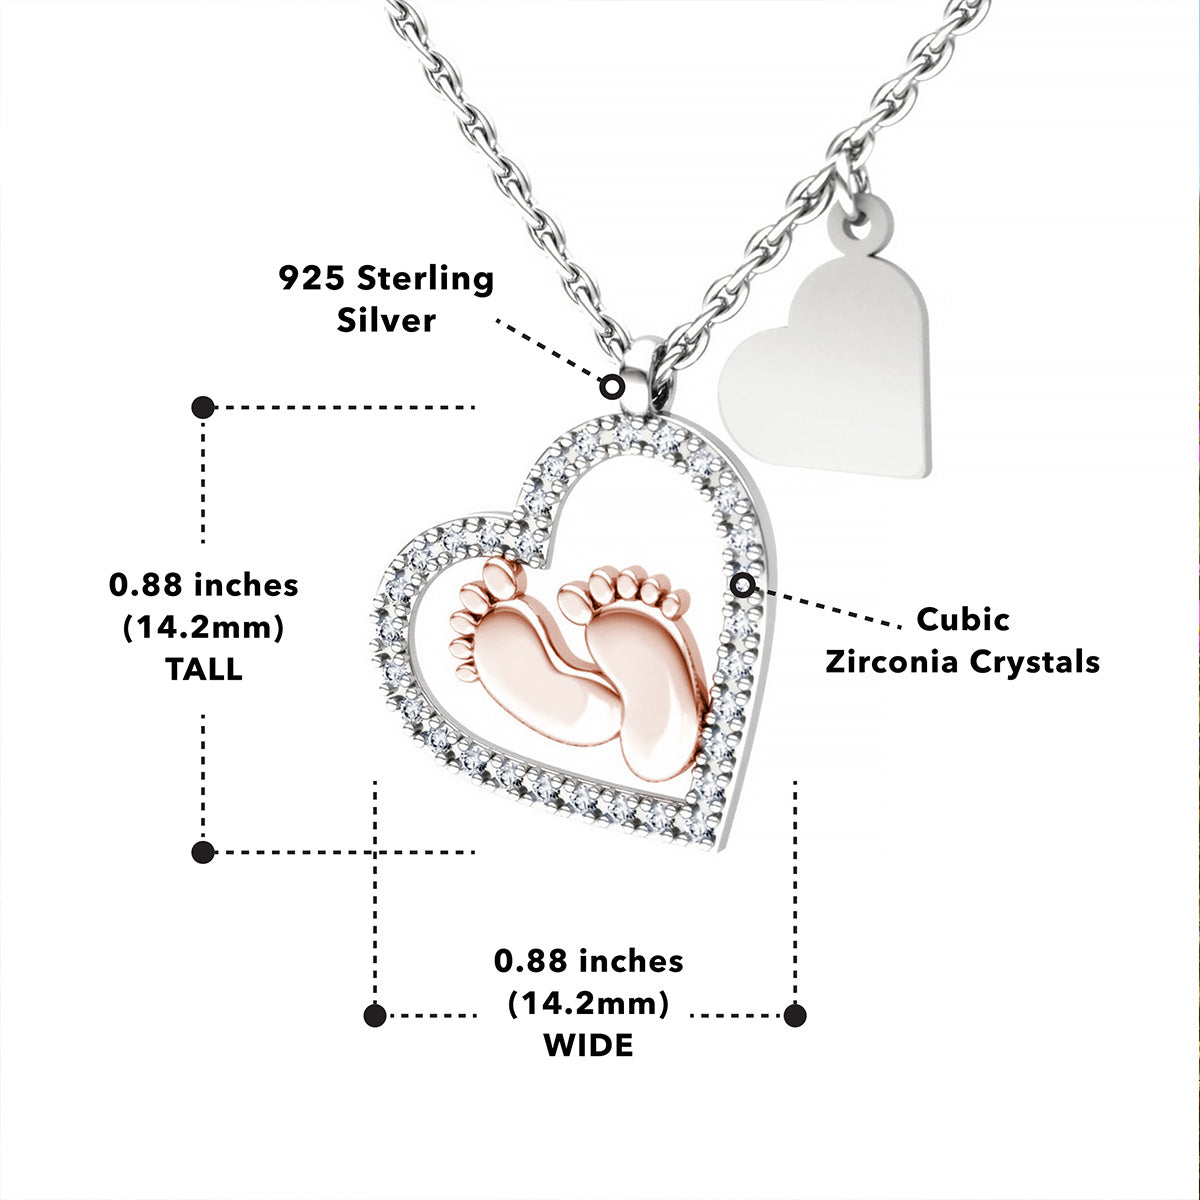 Mother of Twins - Baby Feet Heart Pendant Necklace Gift Set